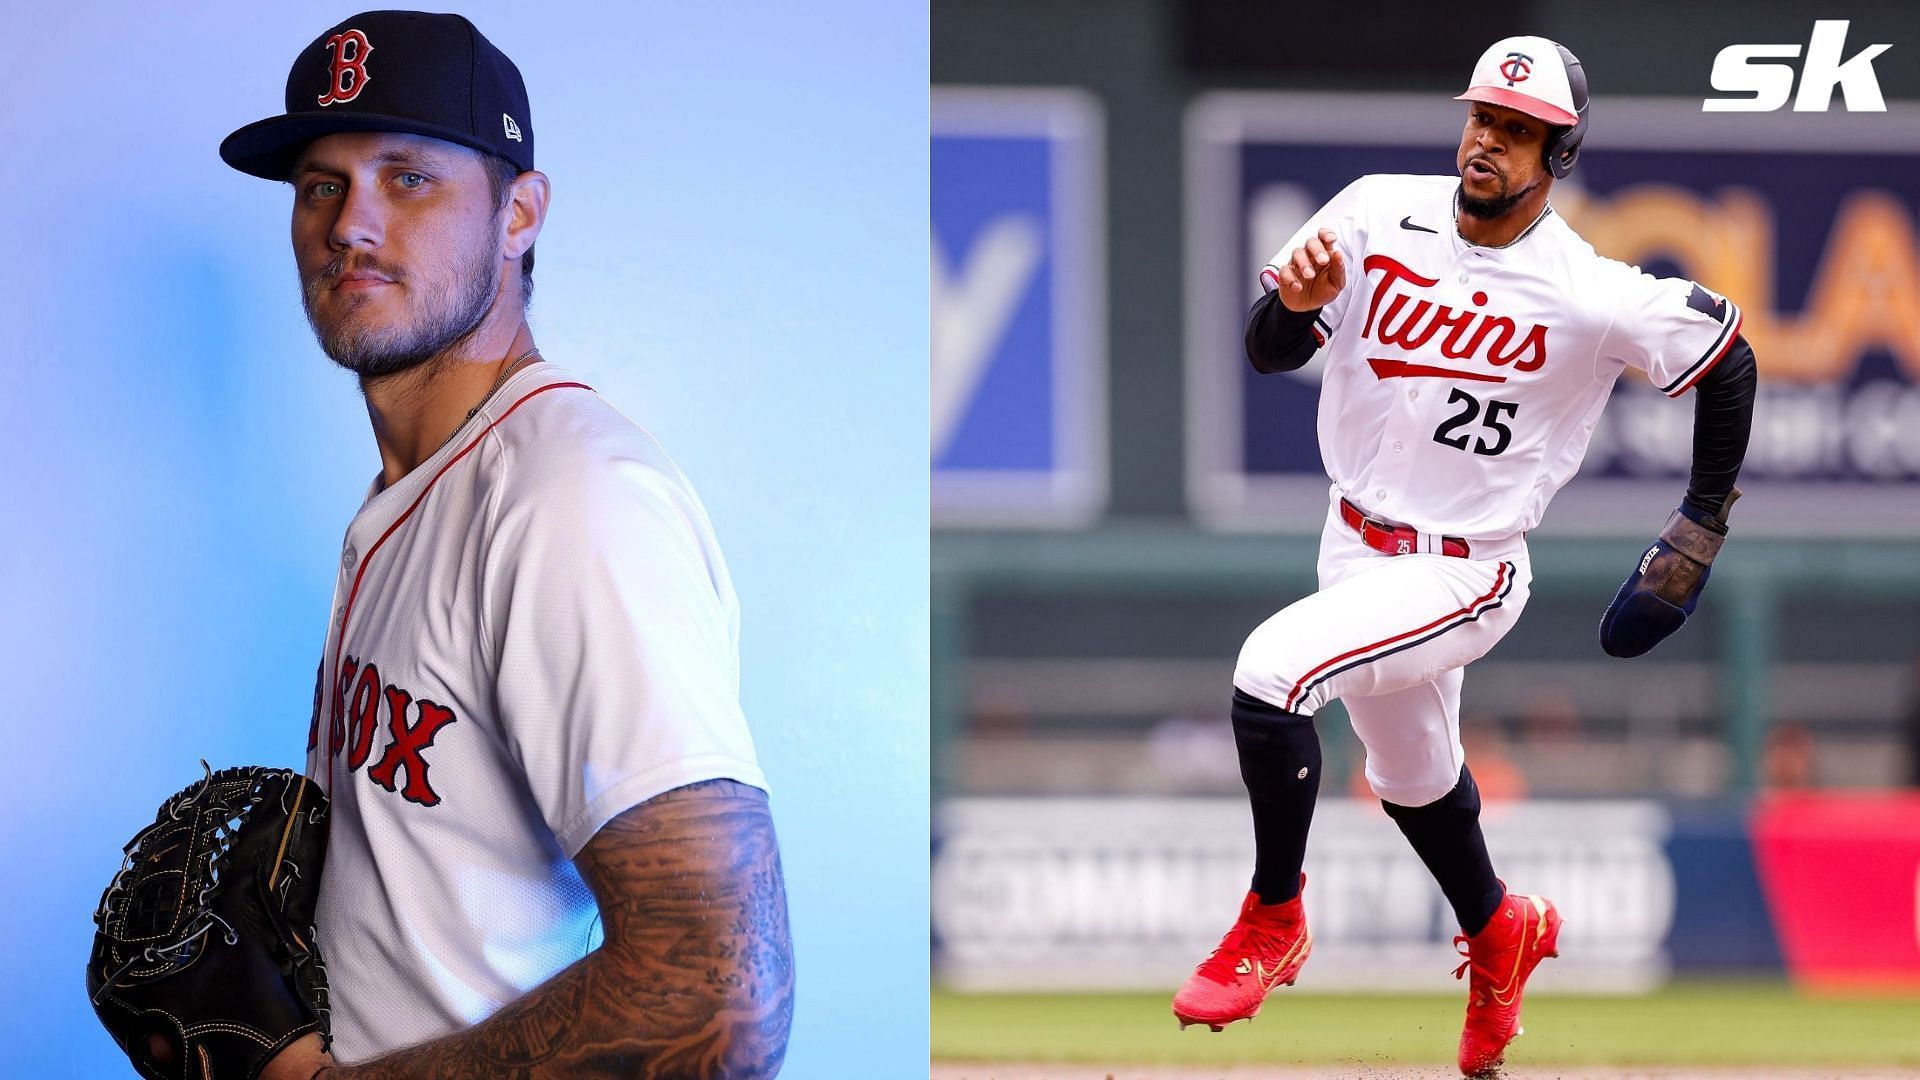 Tanner Houck and Byron Buxton are two players to monitor in week 2 of fantasy baseball